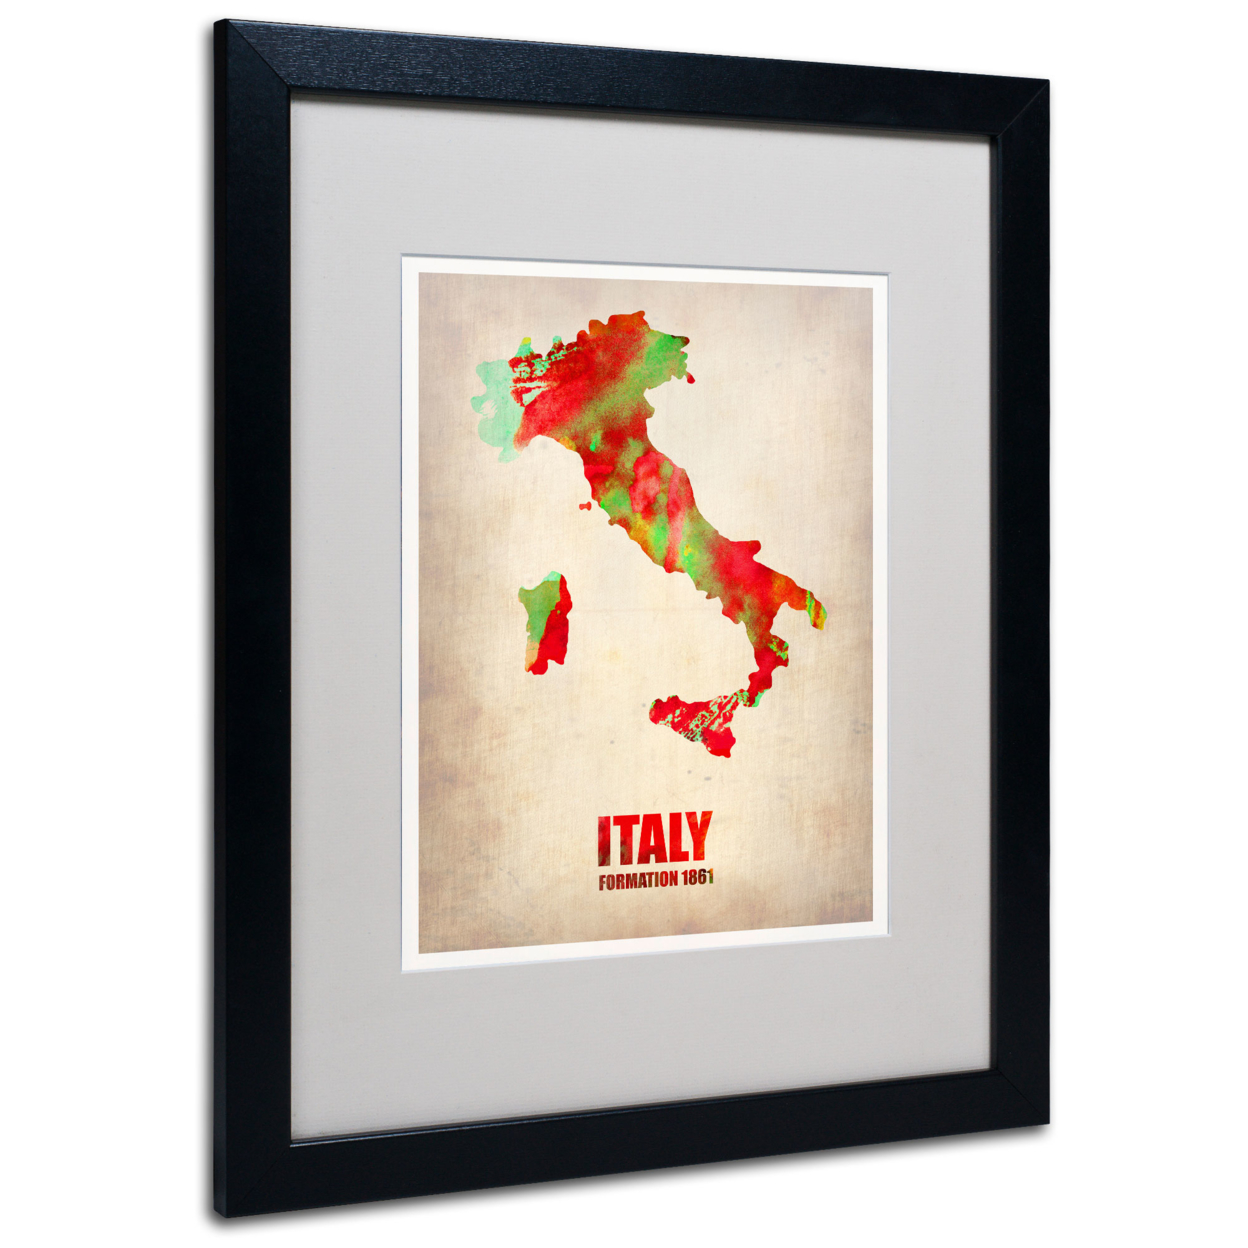 Naxart 'Italy Watercolor Map' Black Wooden Framed Art 18 X 22 Inches